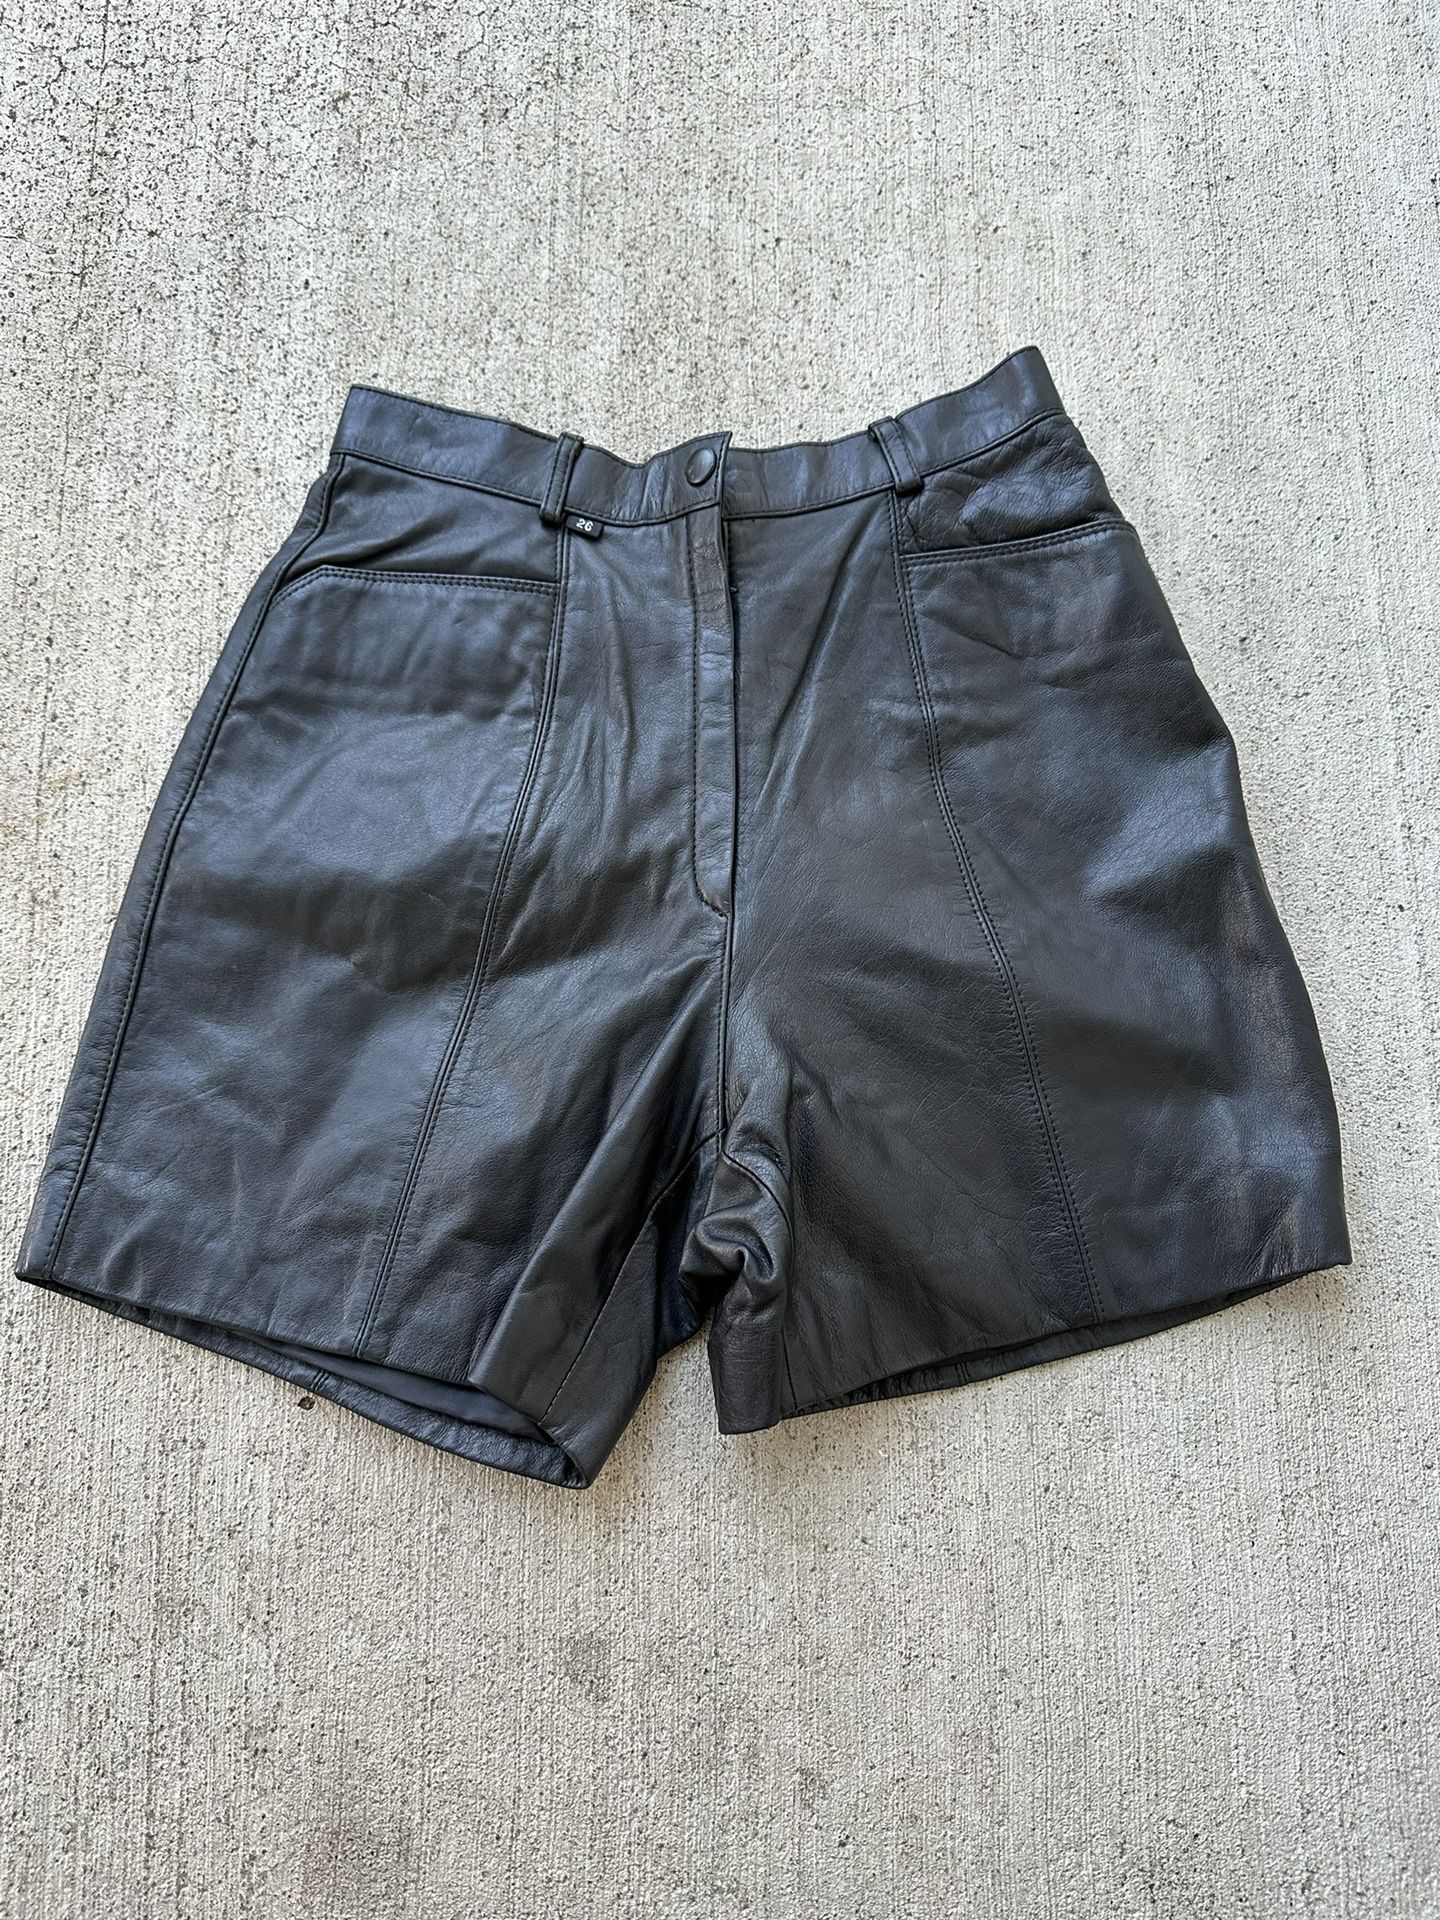 Faux Leather Shorts size 26